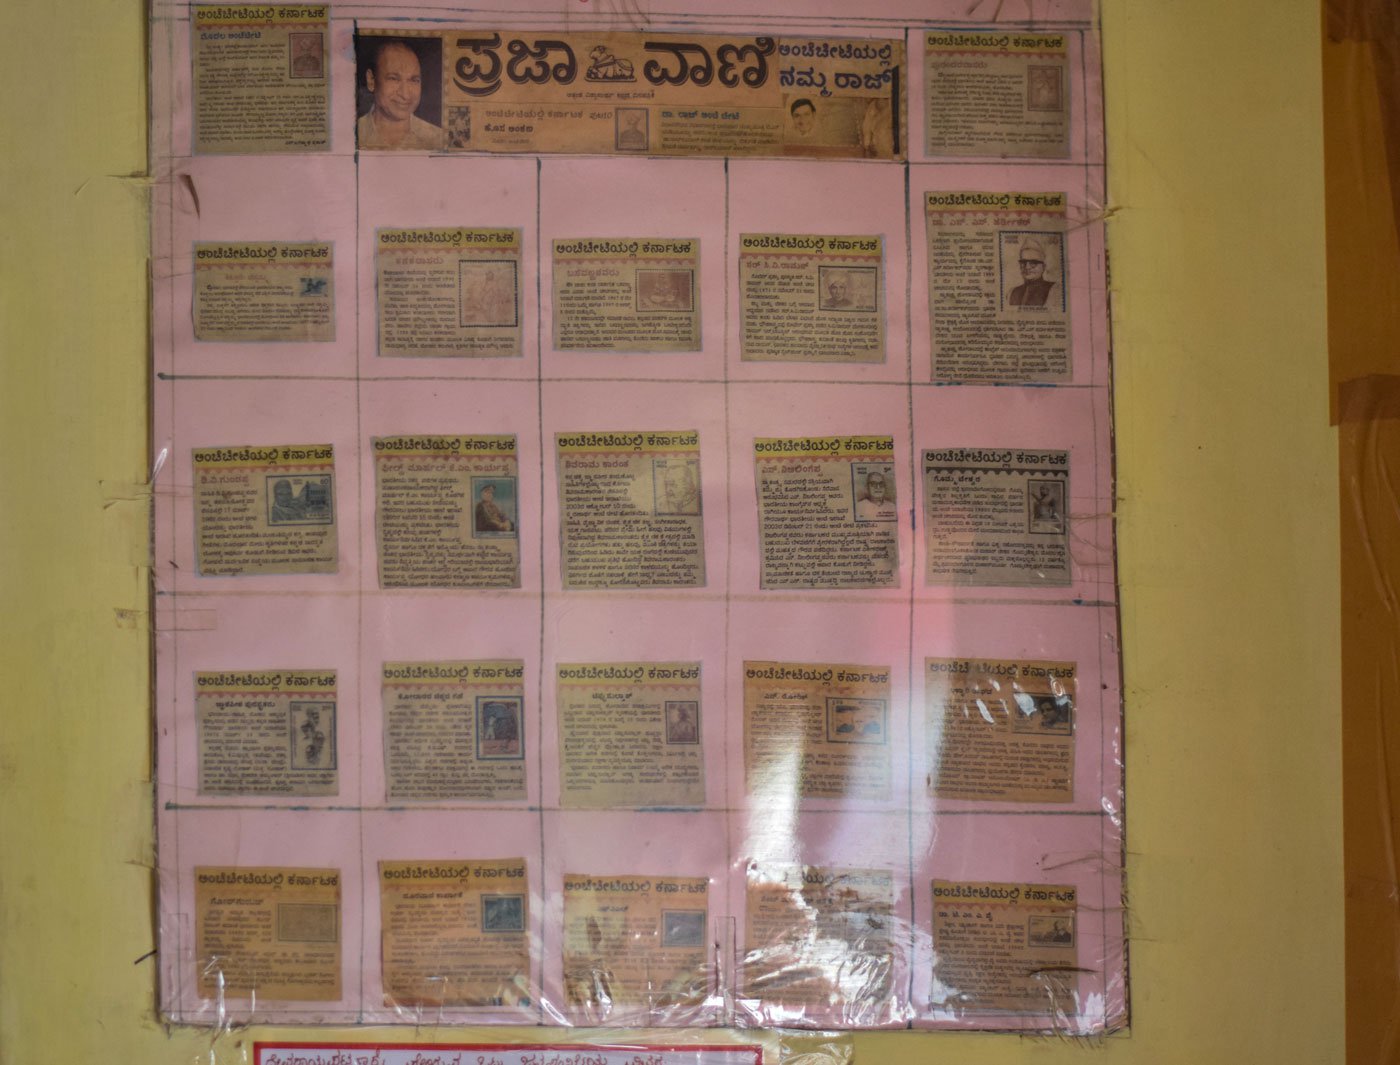 Renuka's stamp collection, which he collected from newspapers as a hobby.